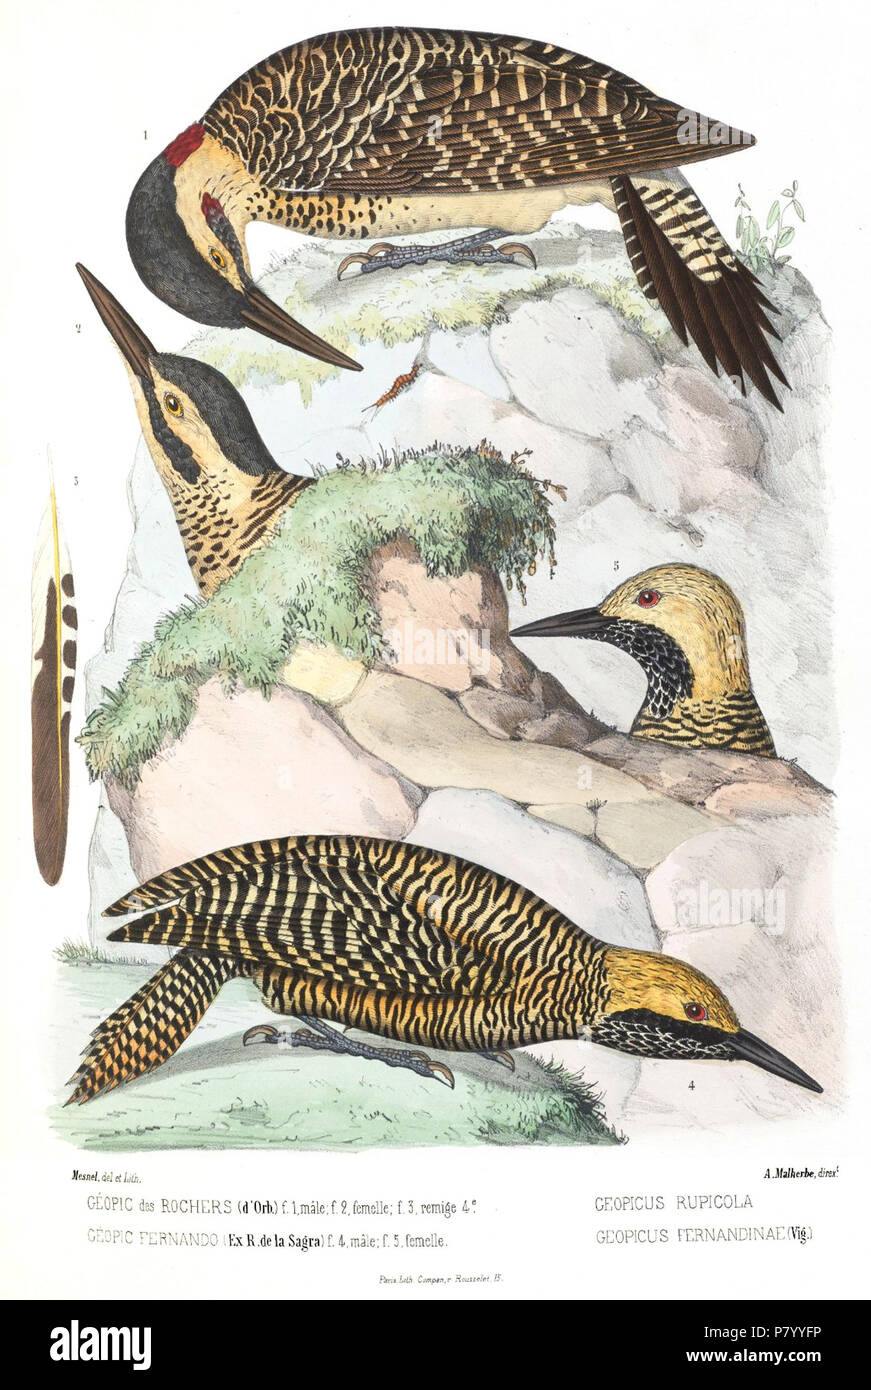 Woodpecker plates from the work of Alfred Malherbe (14 July 1804 – 14 August 1865) Colaptes rupicola, Colaptes fernandinae . 1863 257 Malherbe 113 Stock Photo